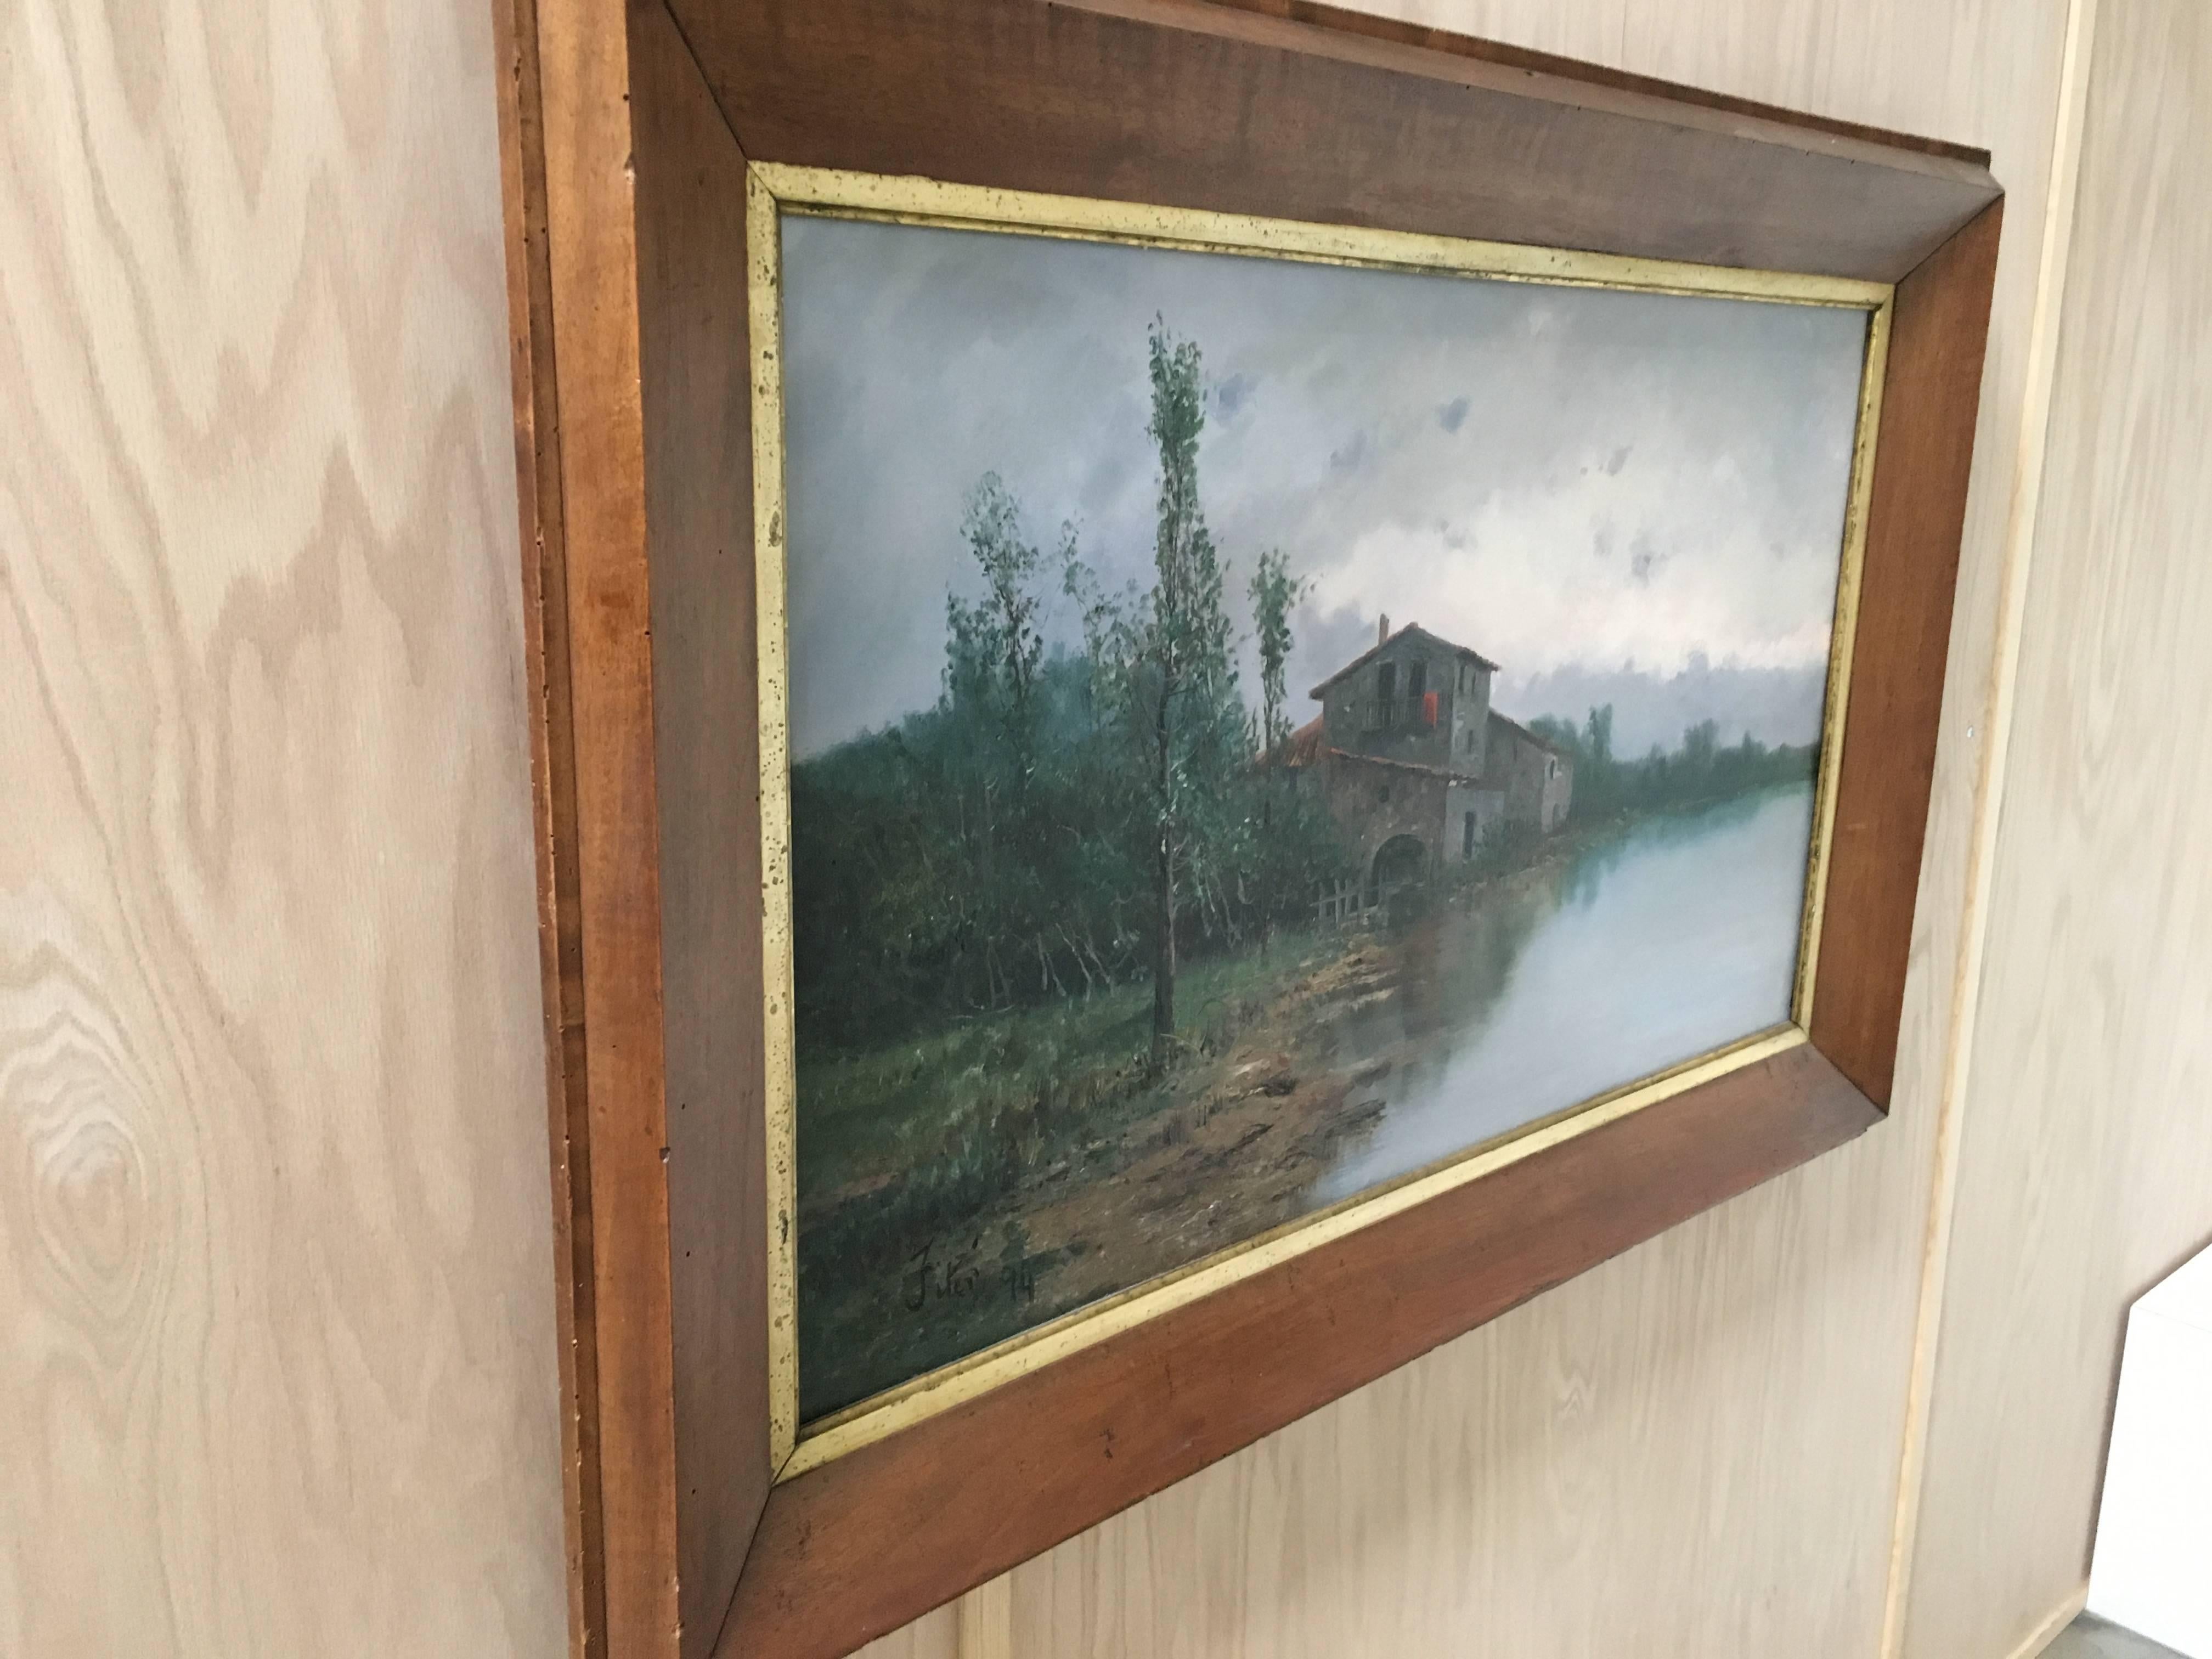 Antique 19th century country French lake house oil on canvas painting with walnut frame
Signed Fiter.